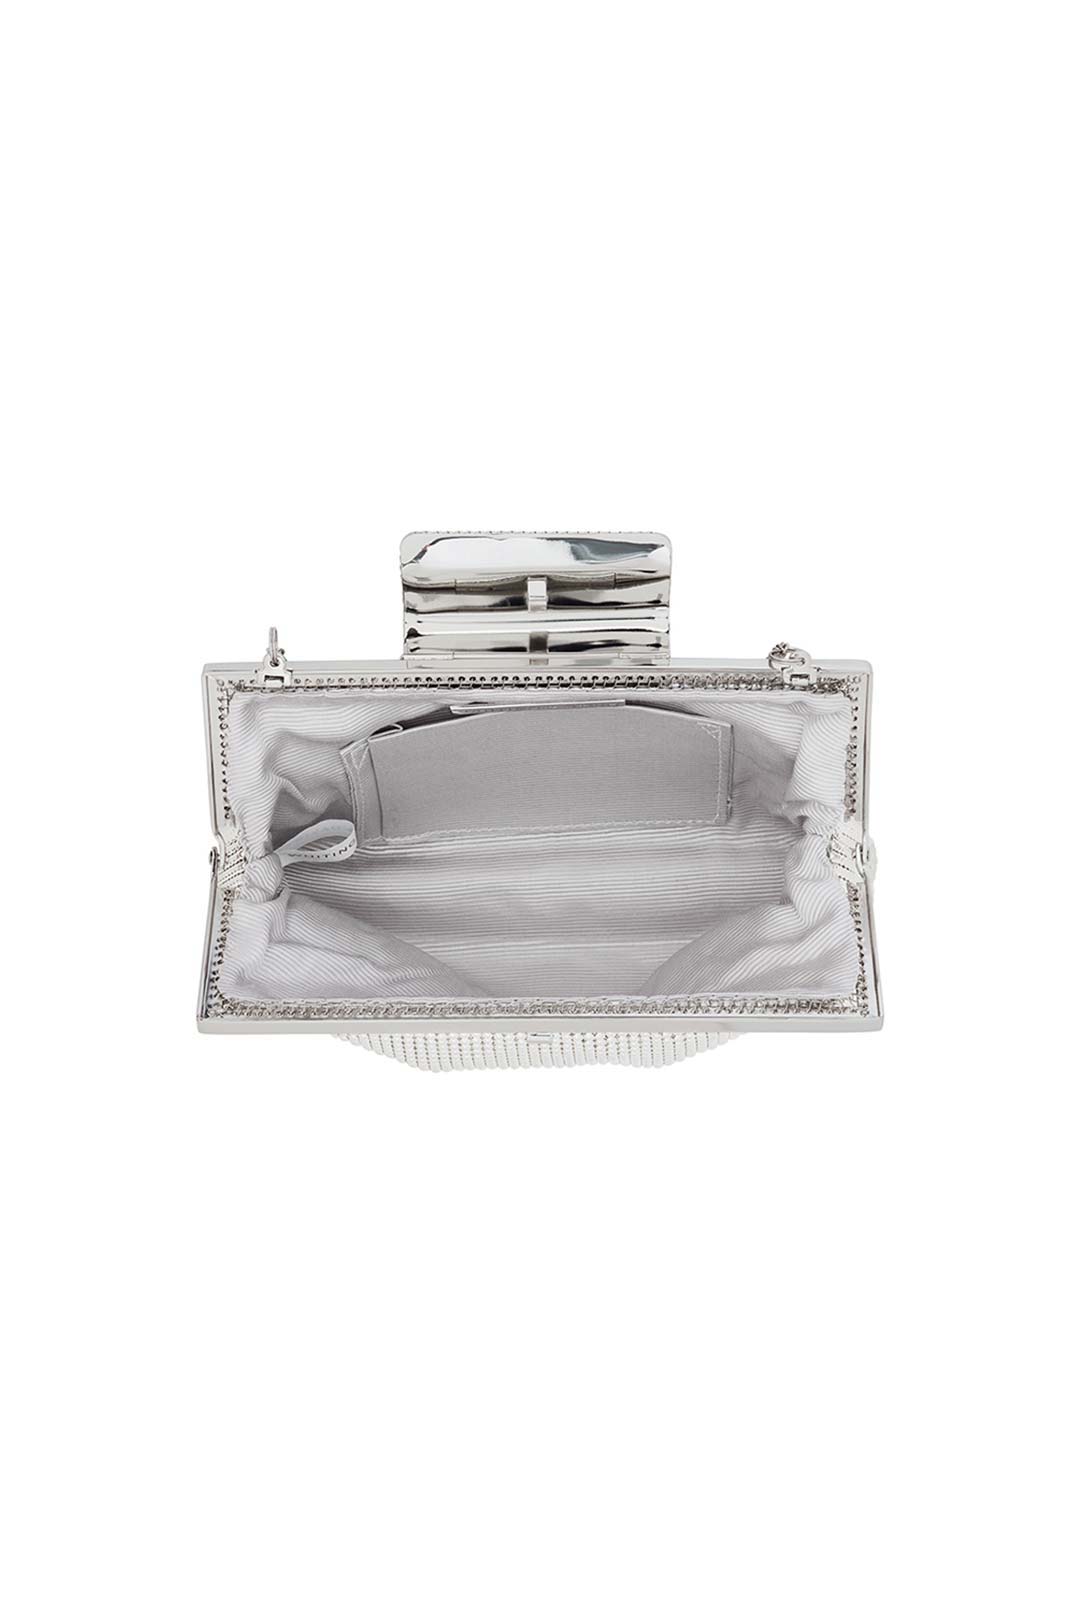 Silver-Crystal-Clasp-Clutch-Whiting-Davis-Rent-A-Dress-Dress-Rental-Canada-Clutch-Rental-Purse-Rental 1